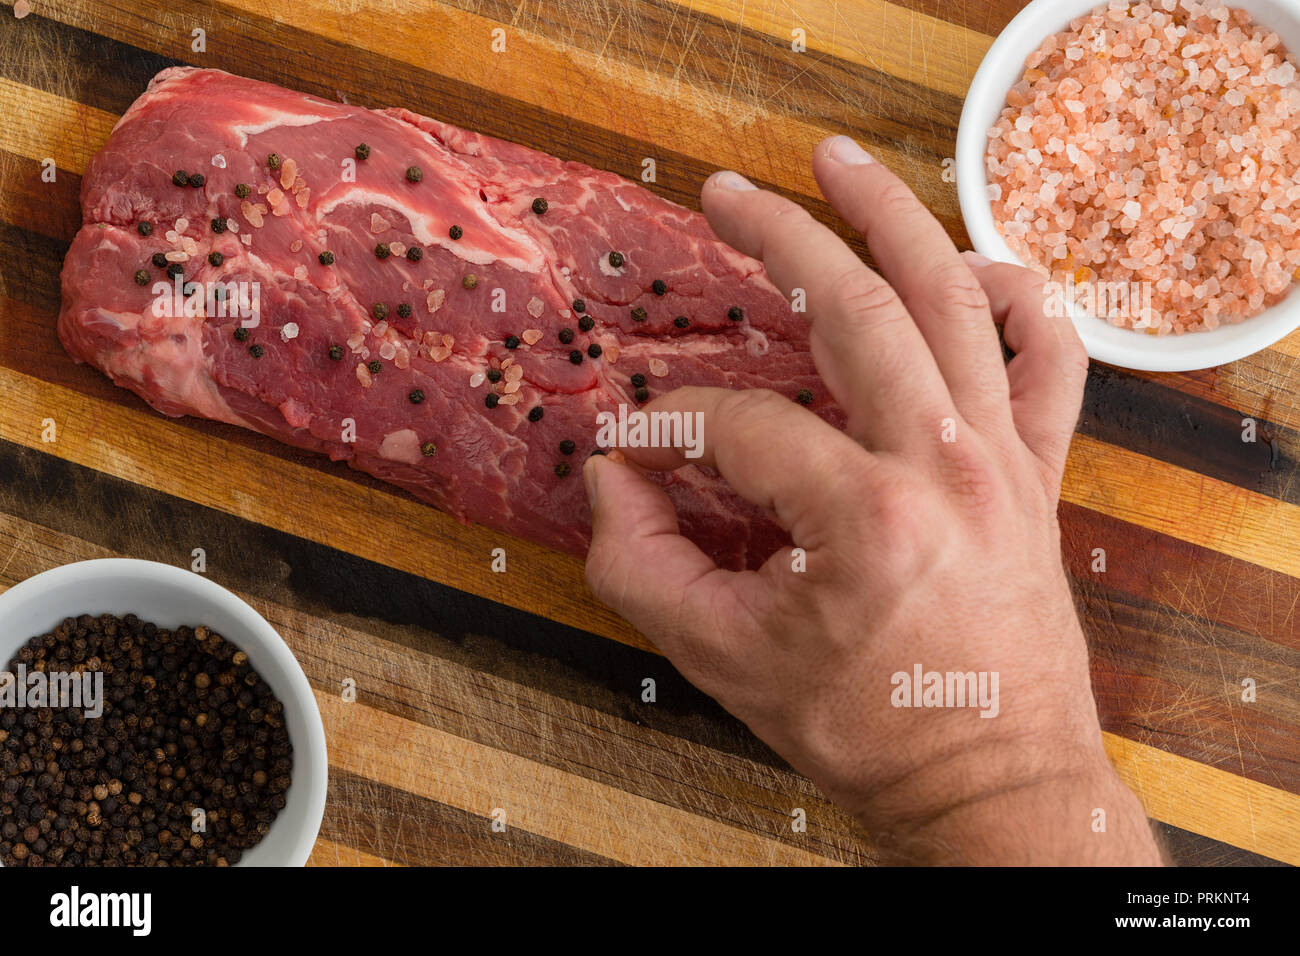 Man dropping seasoning on slab of red meat sitting on striped wooden table next to bowls of pepper and salt Stock Photo